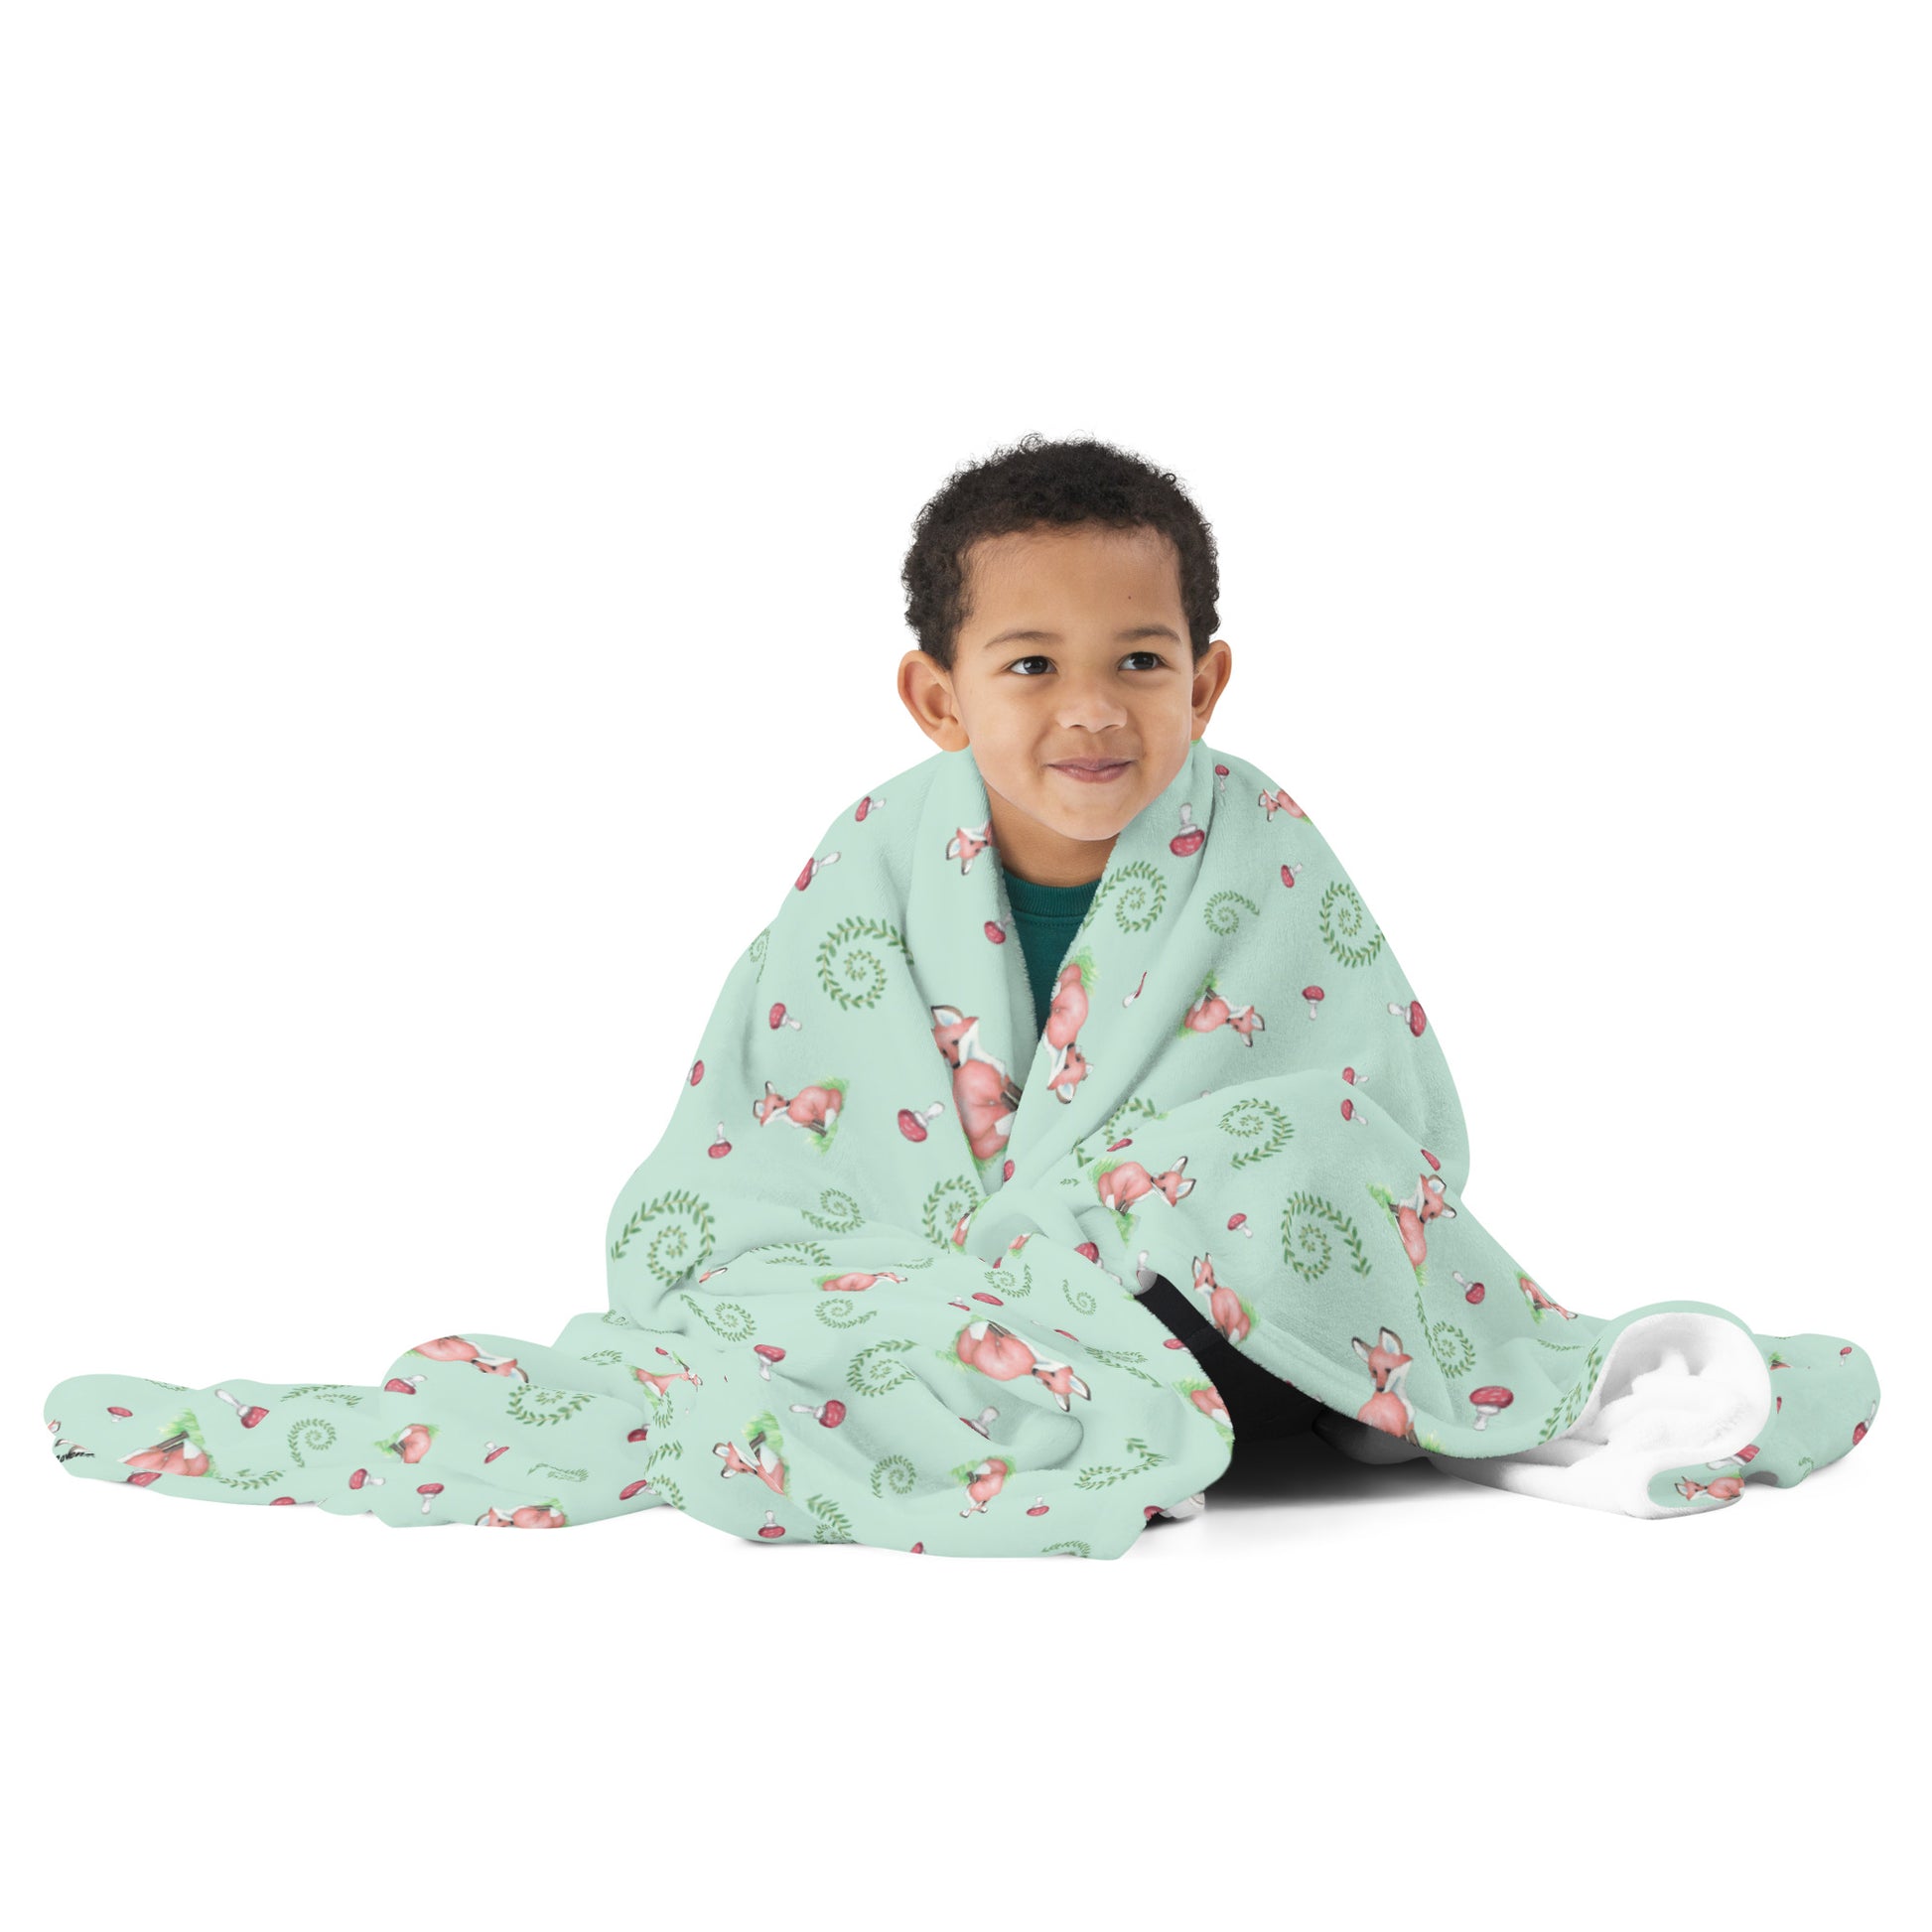 60 by 80 inch watercolor forest fox patterned blanket. Made of soft and fluffy polyester. Has foxes, mushrooms, and ferns on light green background. White underside. Machine-washable, hypoallergenic, and flame retardant. Shown wrapped around a child.